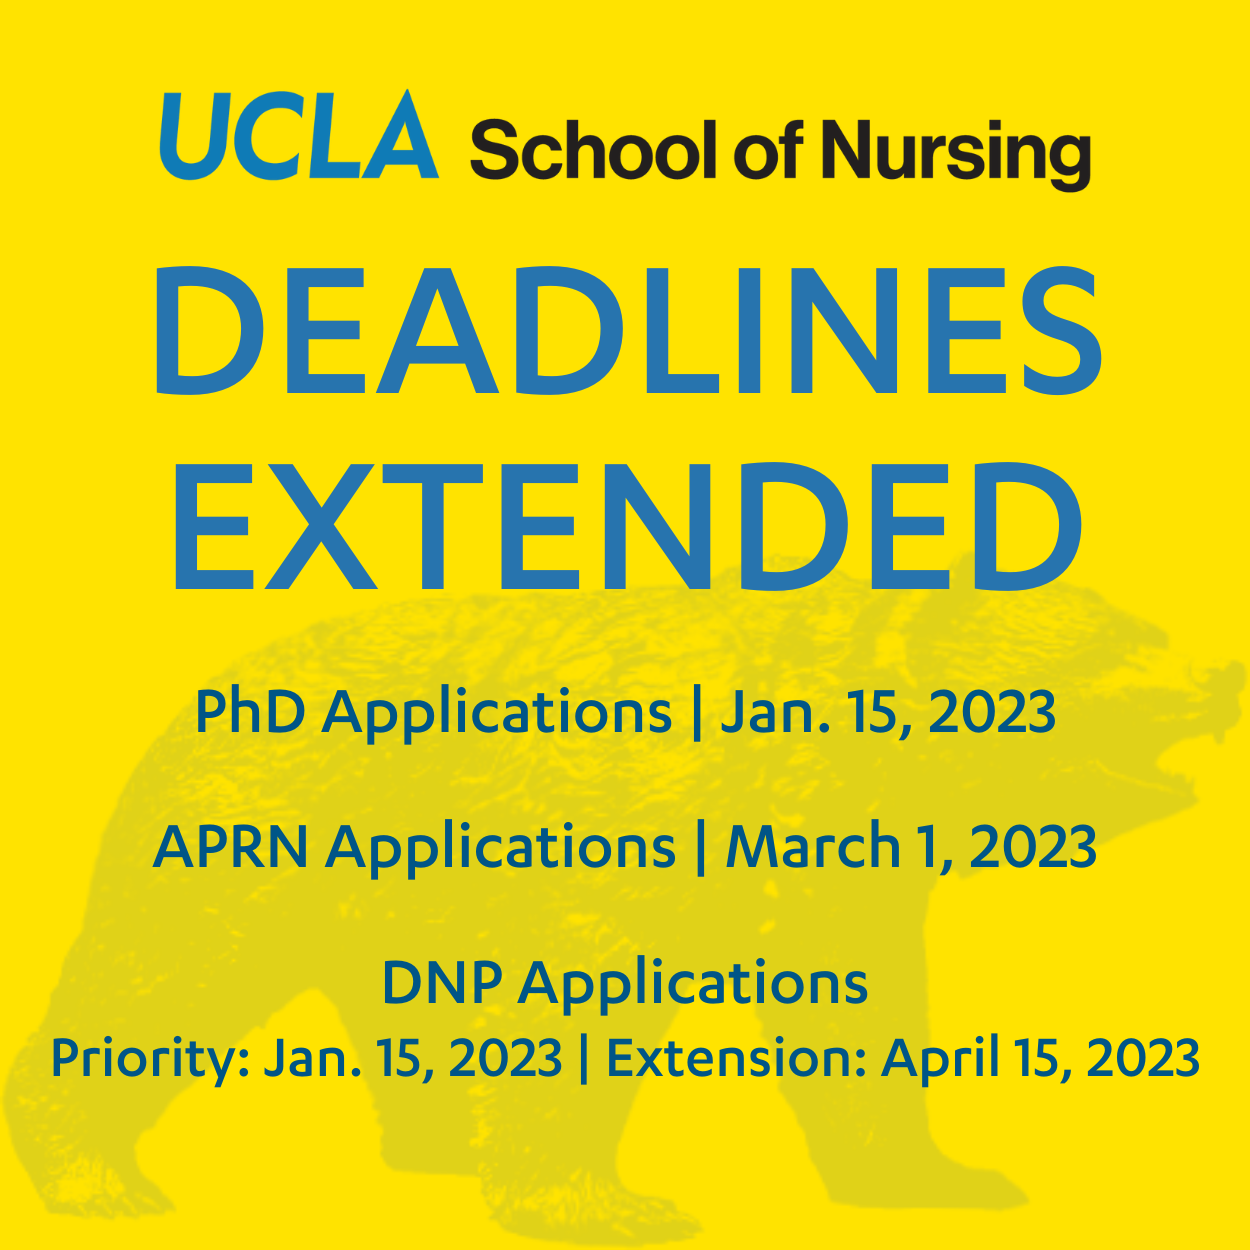 Application deadlines extended for three graduate programs UCLA